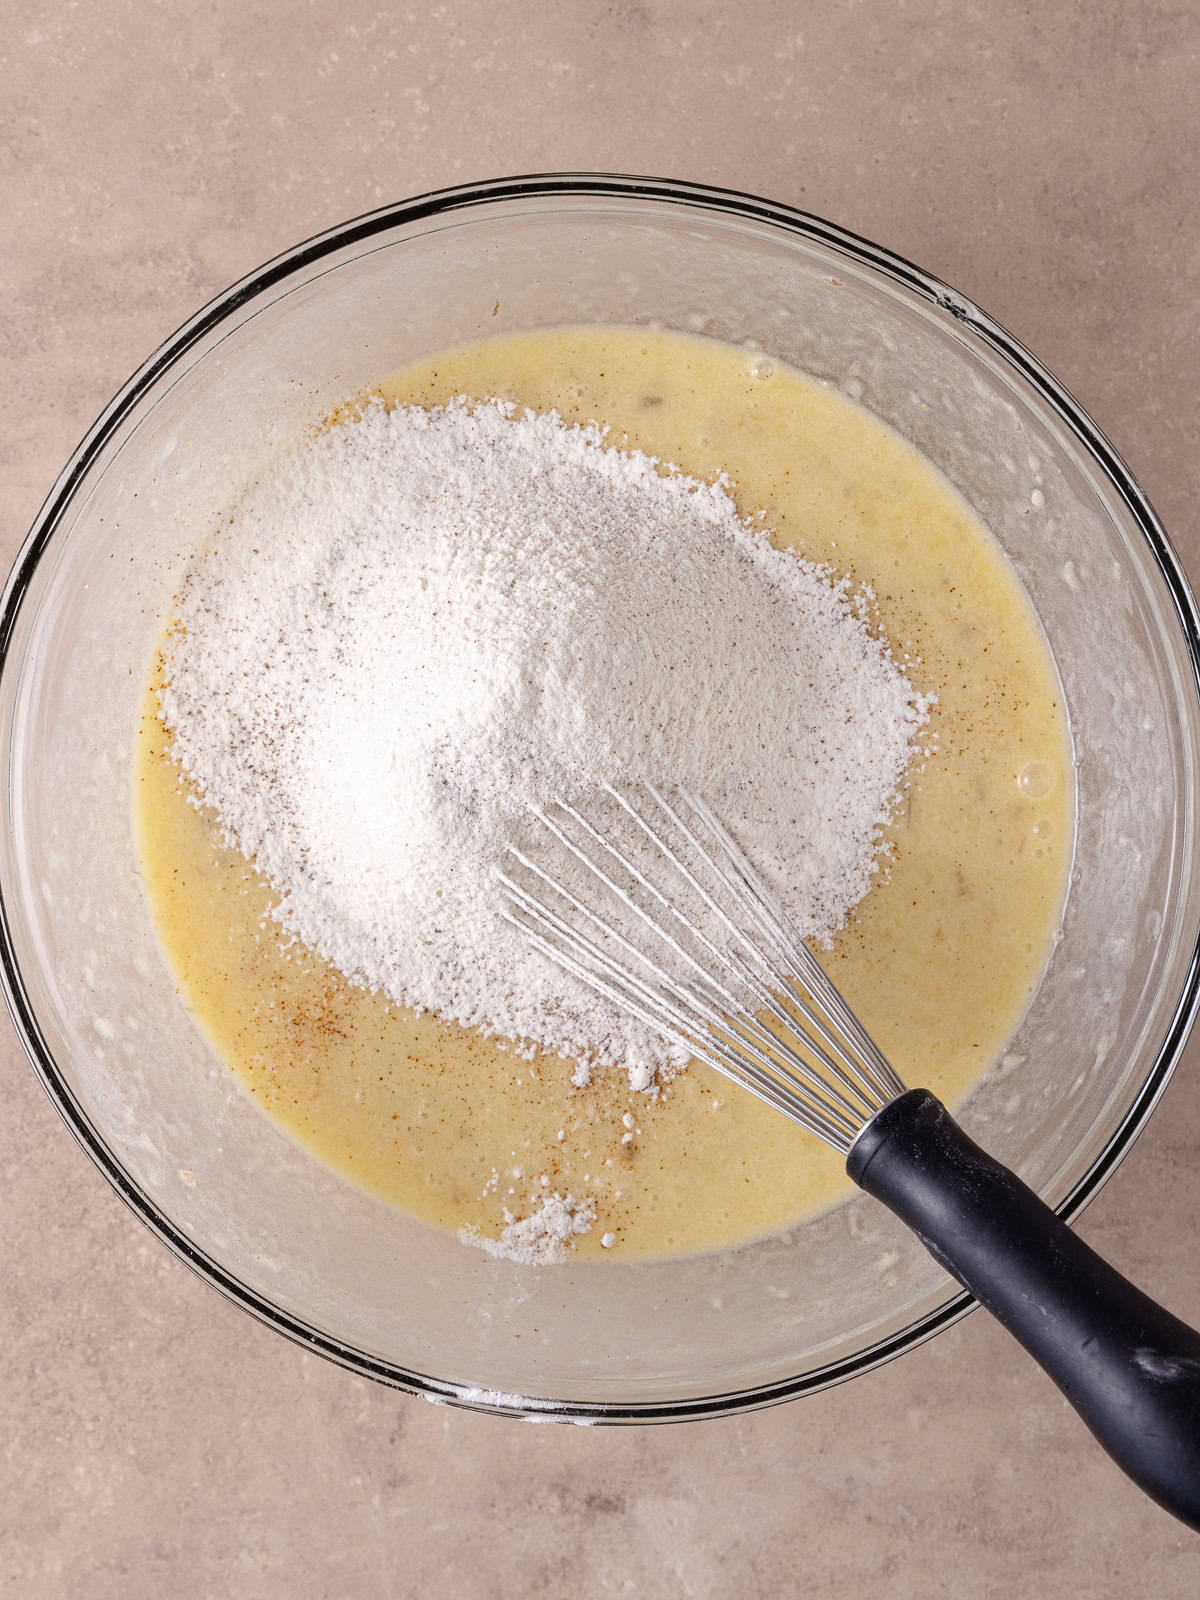 Dry ingredients, which is flour, espresso, salt, baking powder and baking soda is sifted into the wet ingredients.